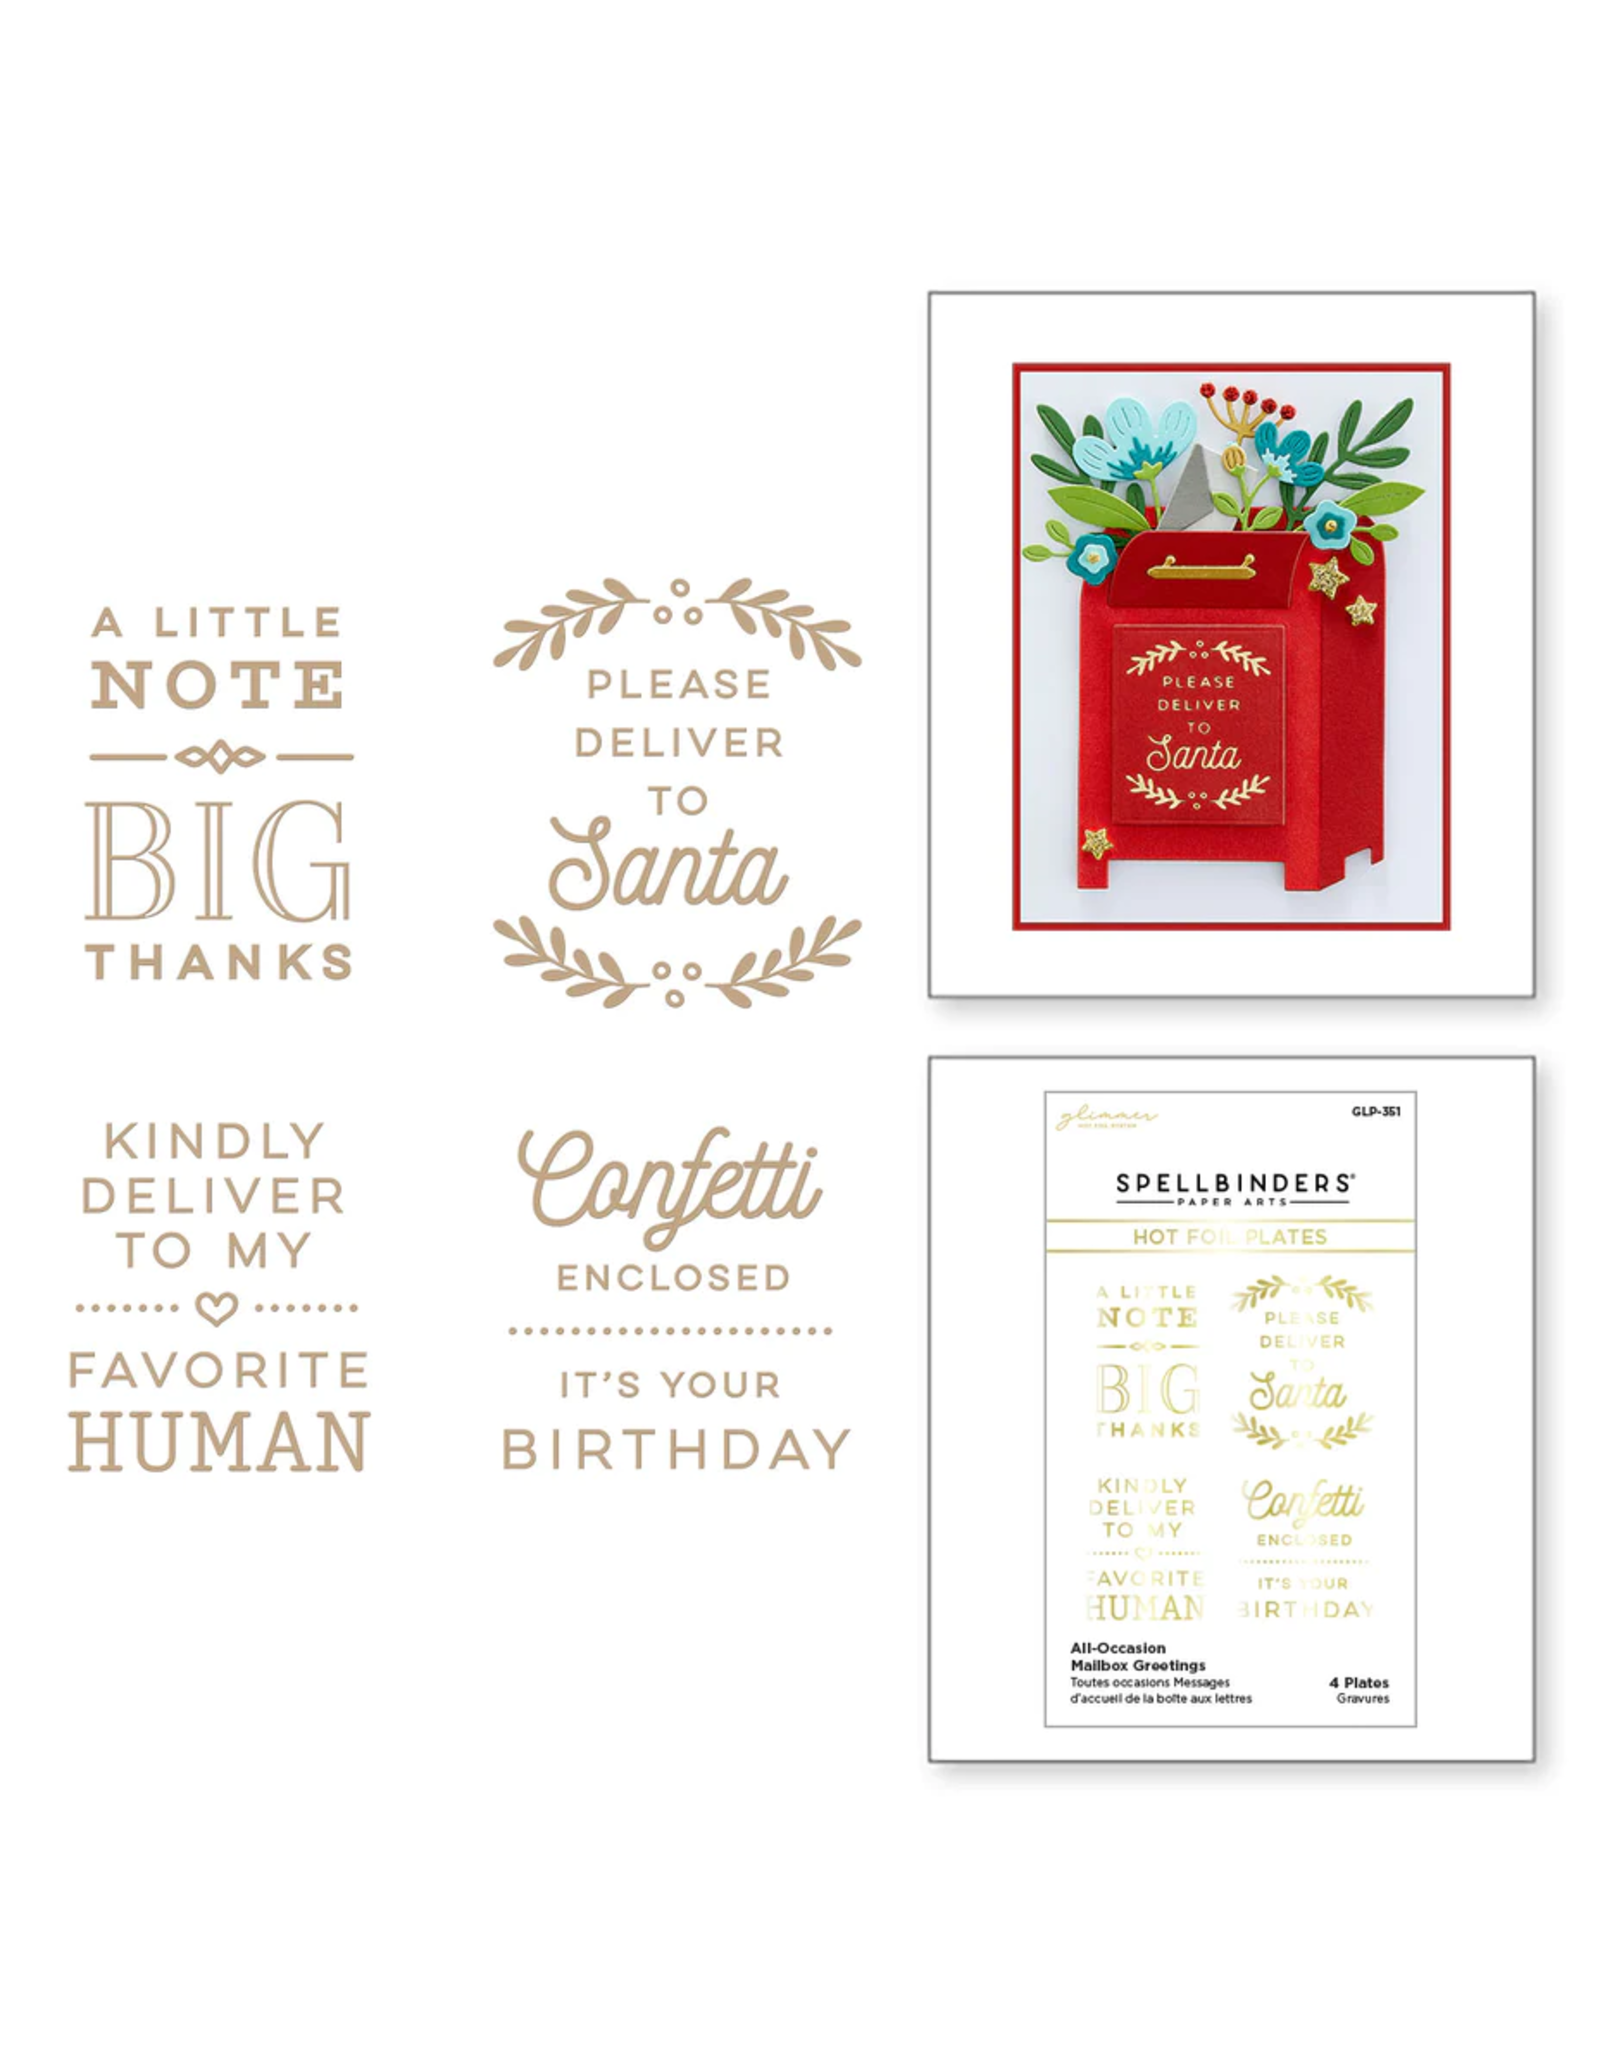 Spellbinders All-Occasion Mailbox Greetings - Glimmer Hot Foil Plate